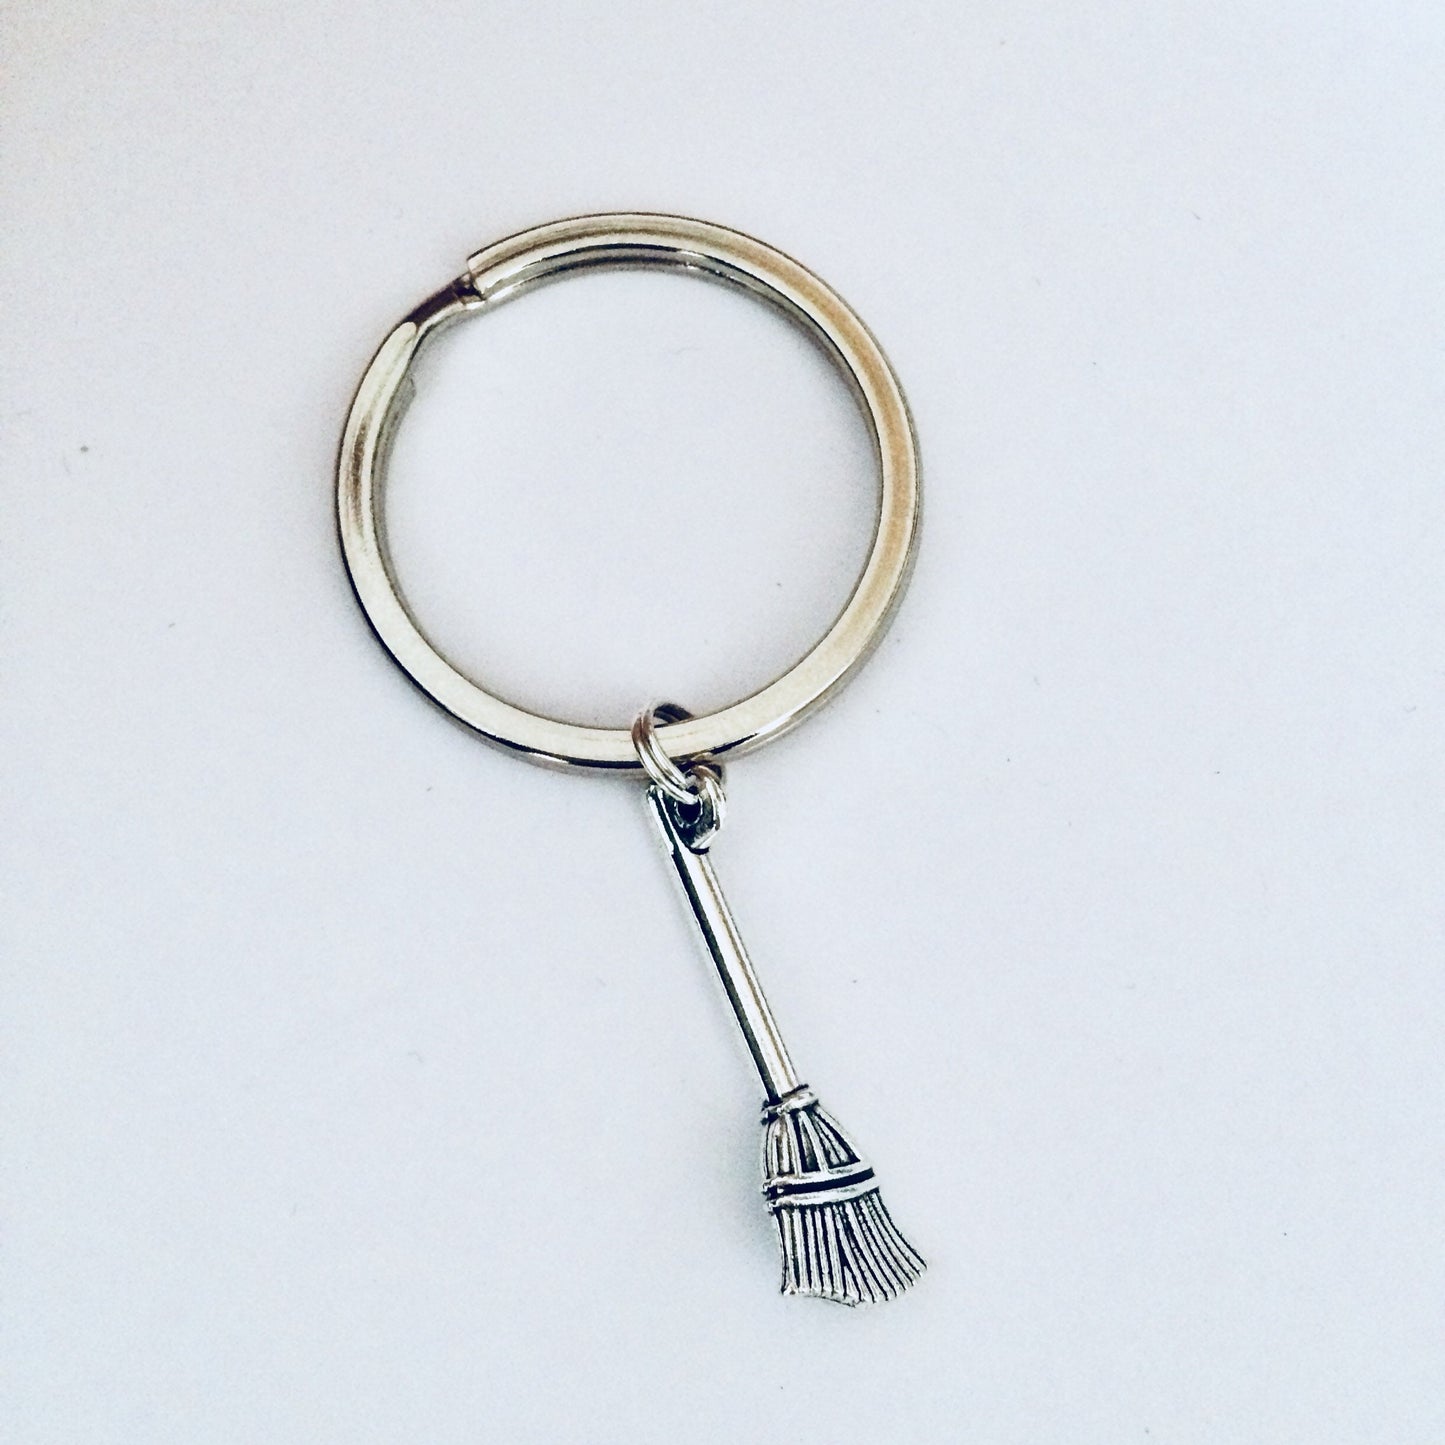 Broomstick Keychain, Witch Related Gifts, Broomstick Keyring, Pagan Gift, Witchy Gift, Witchcraft Keychain, Witch Accessories, Halloween.